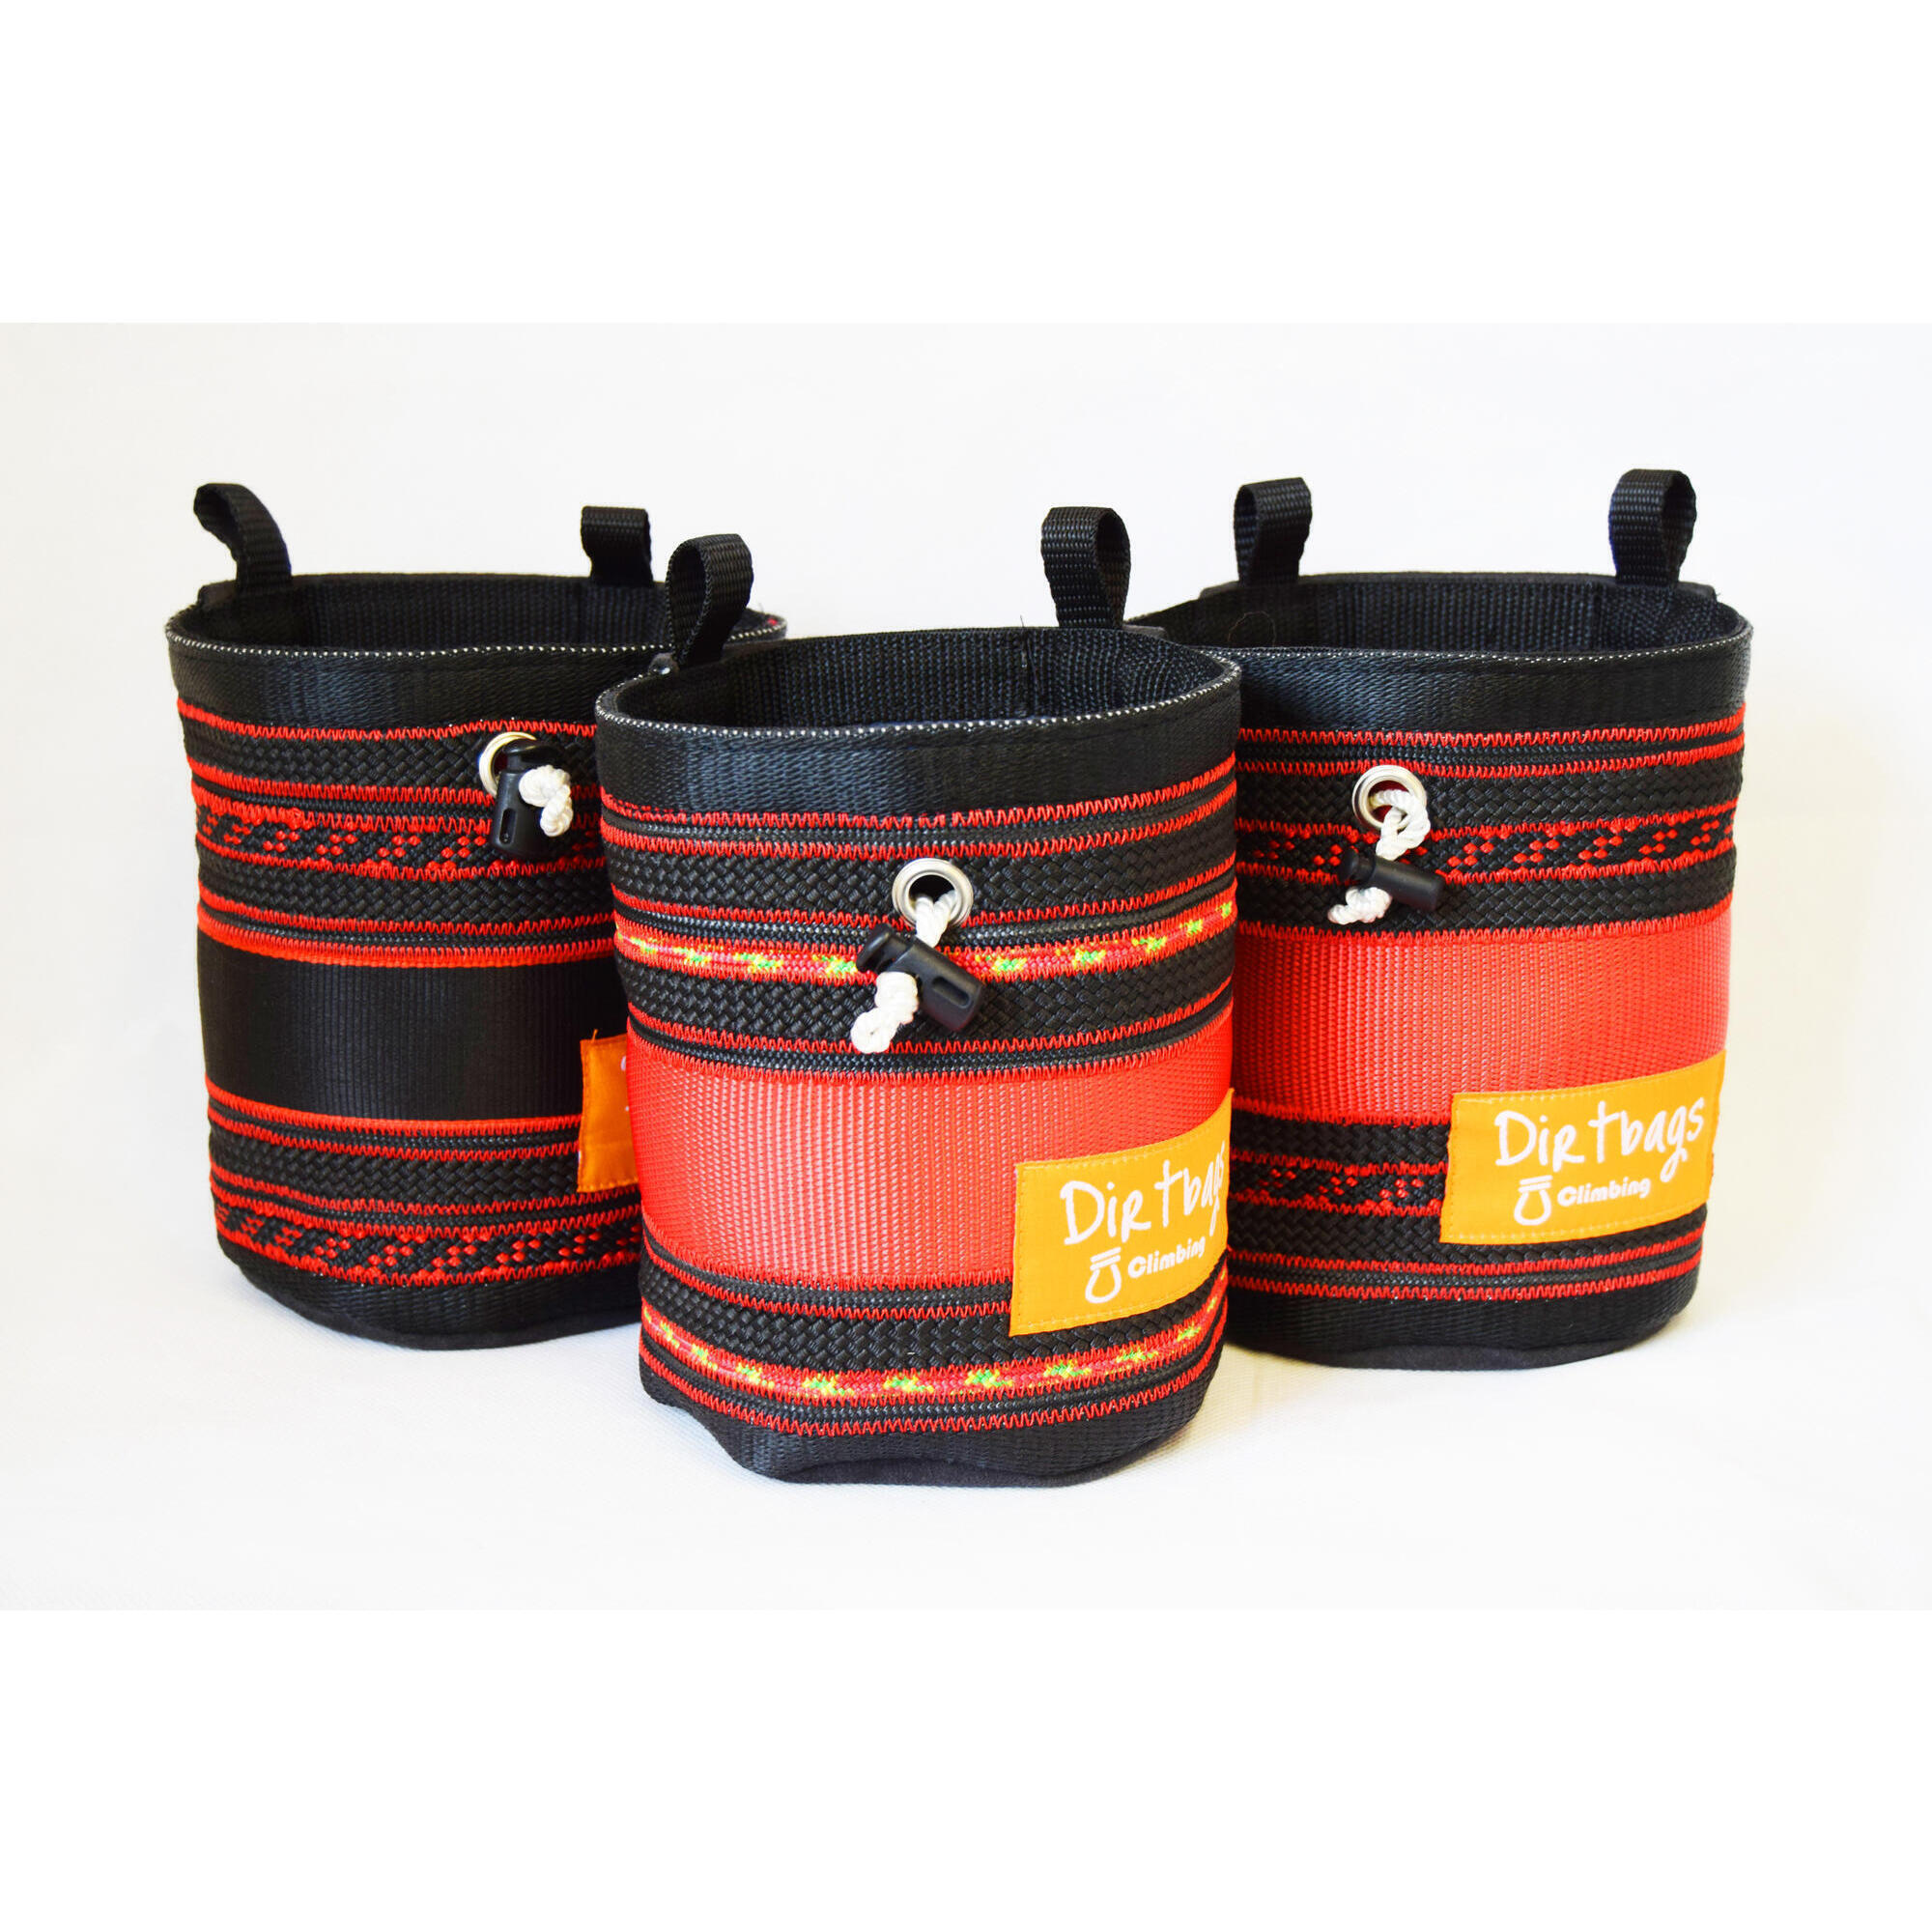 DIRTBAGS CLIMBING Recycled climbing rope chalk bag, made in the UK / Red